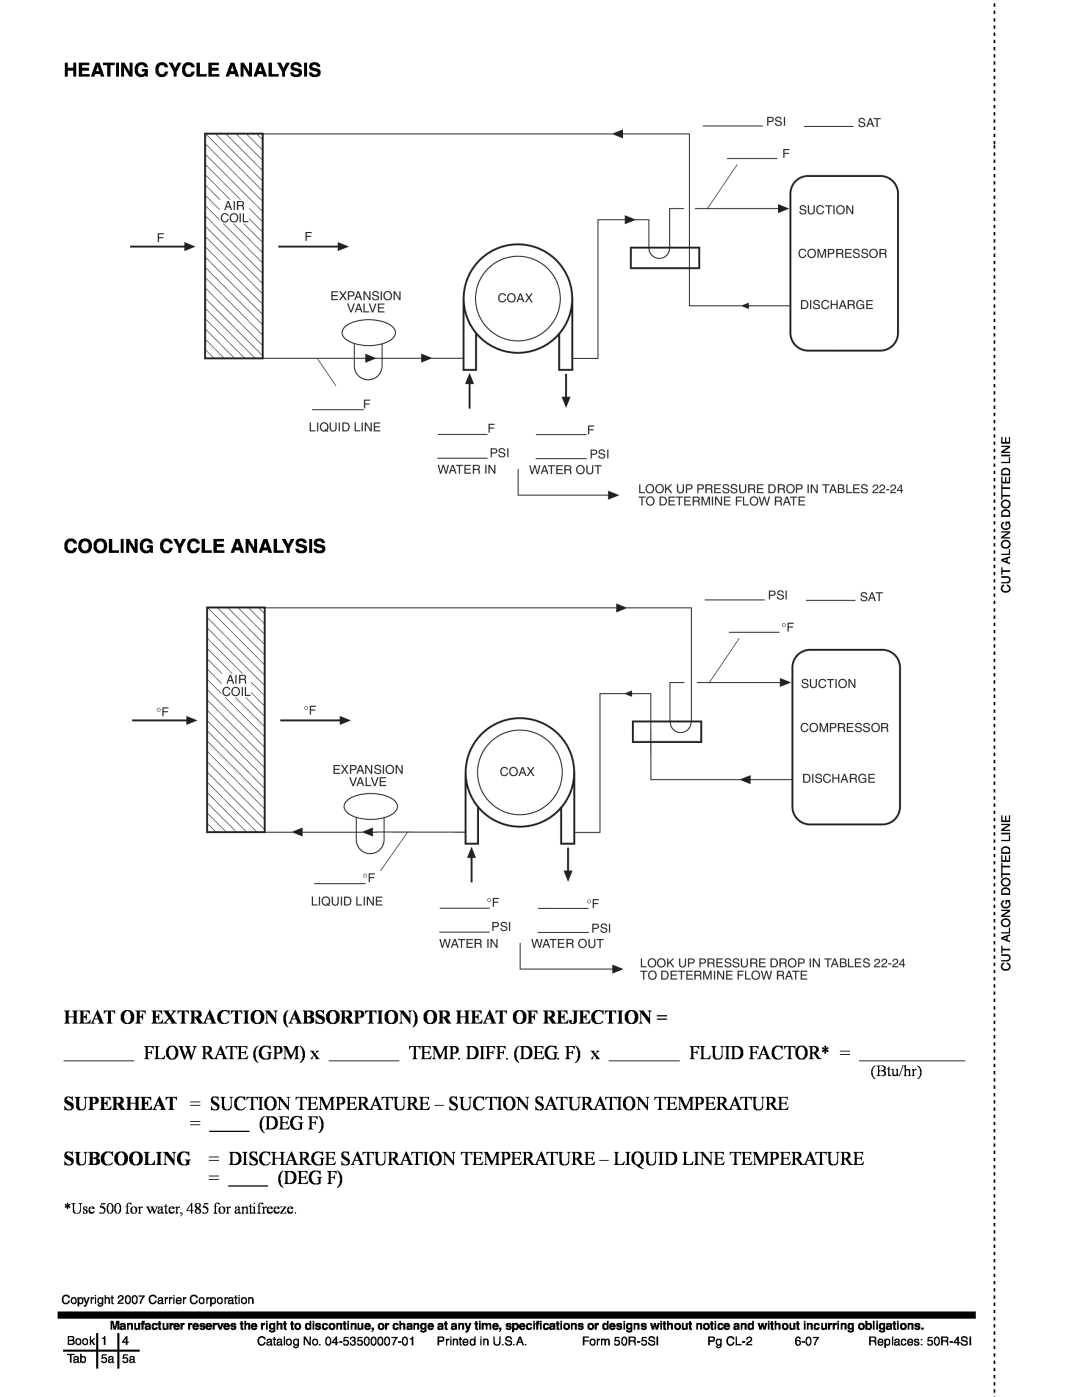 Carrier RVR Heating Cycle Analysis, Cooling Cycle Analysis, Flow Rate Gpm, Temp. Diff. Deg. F, Fluid Factor* =, a50-8165 